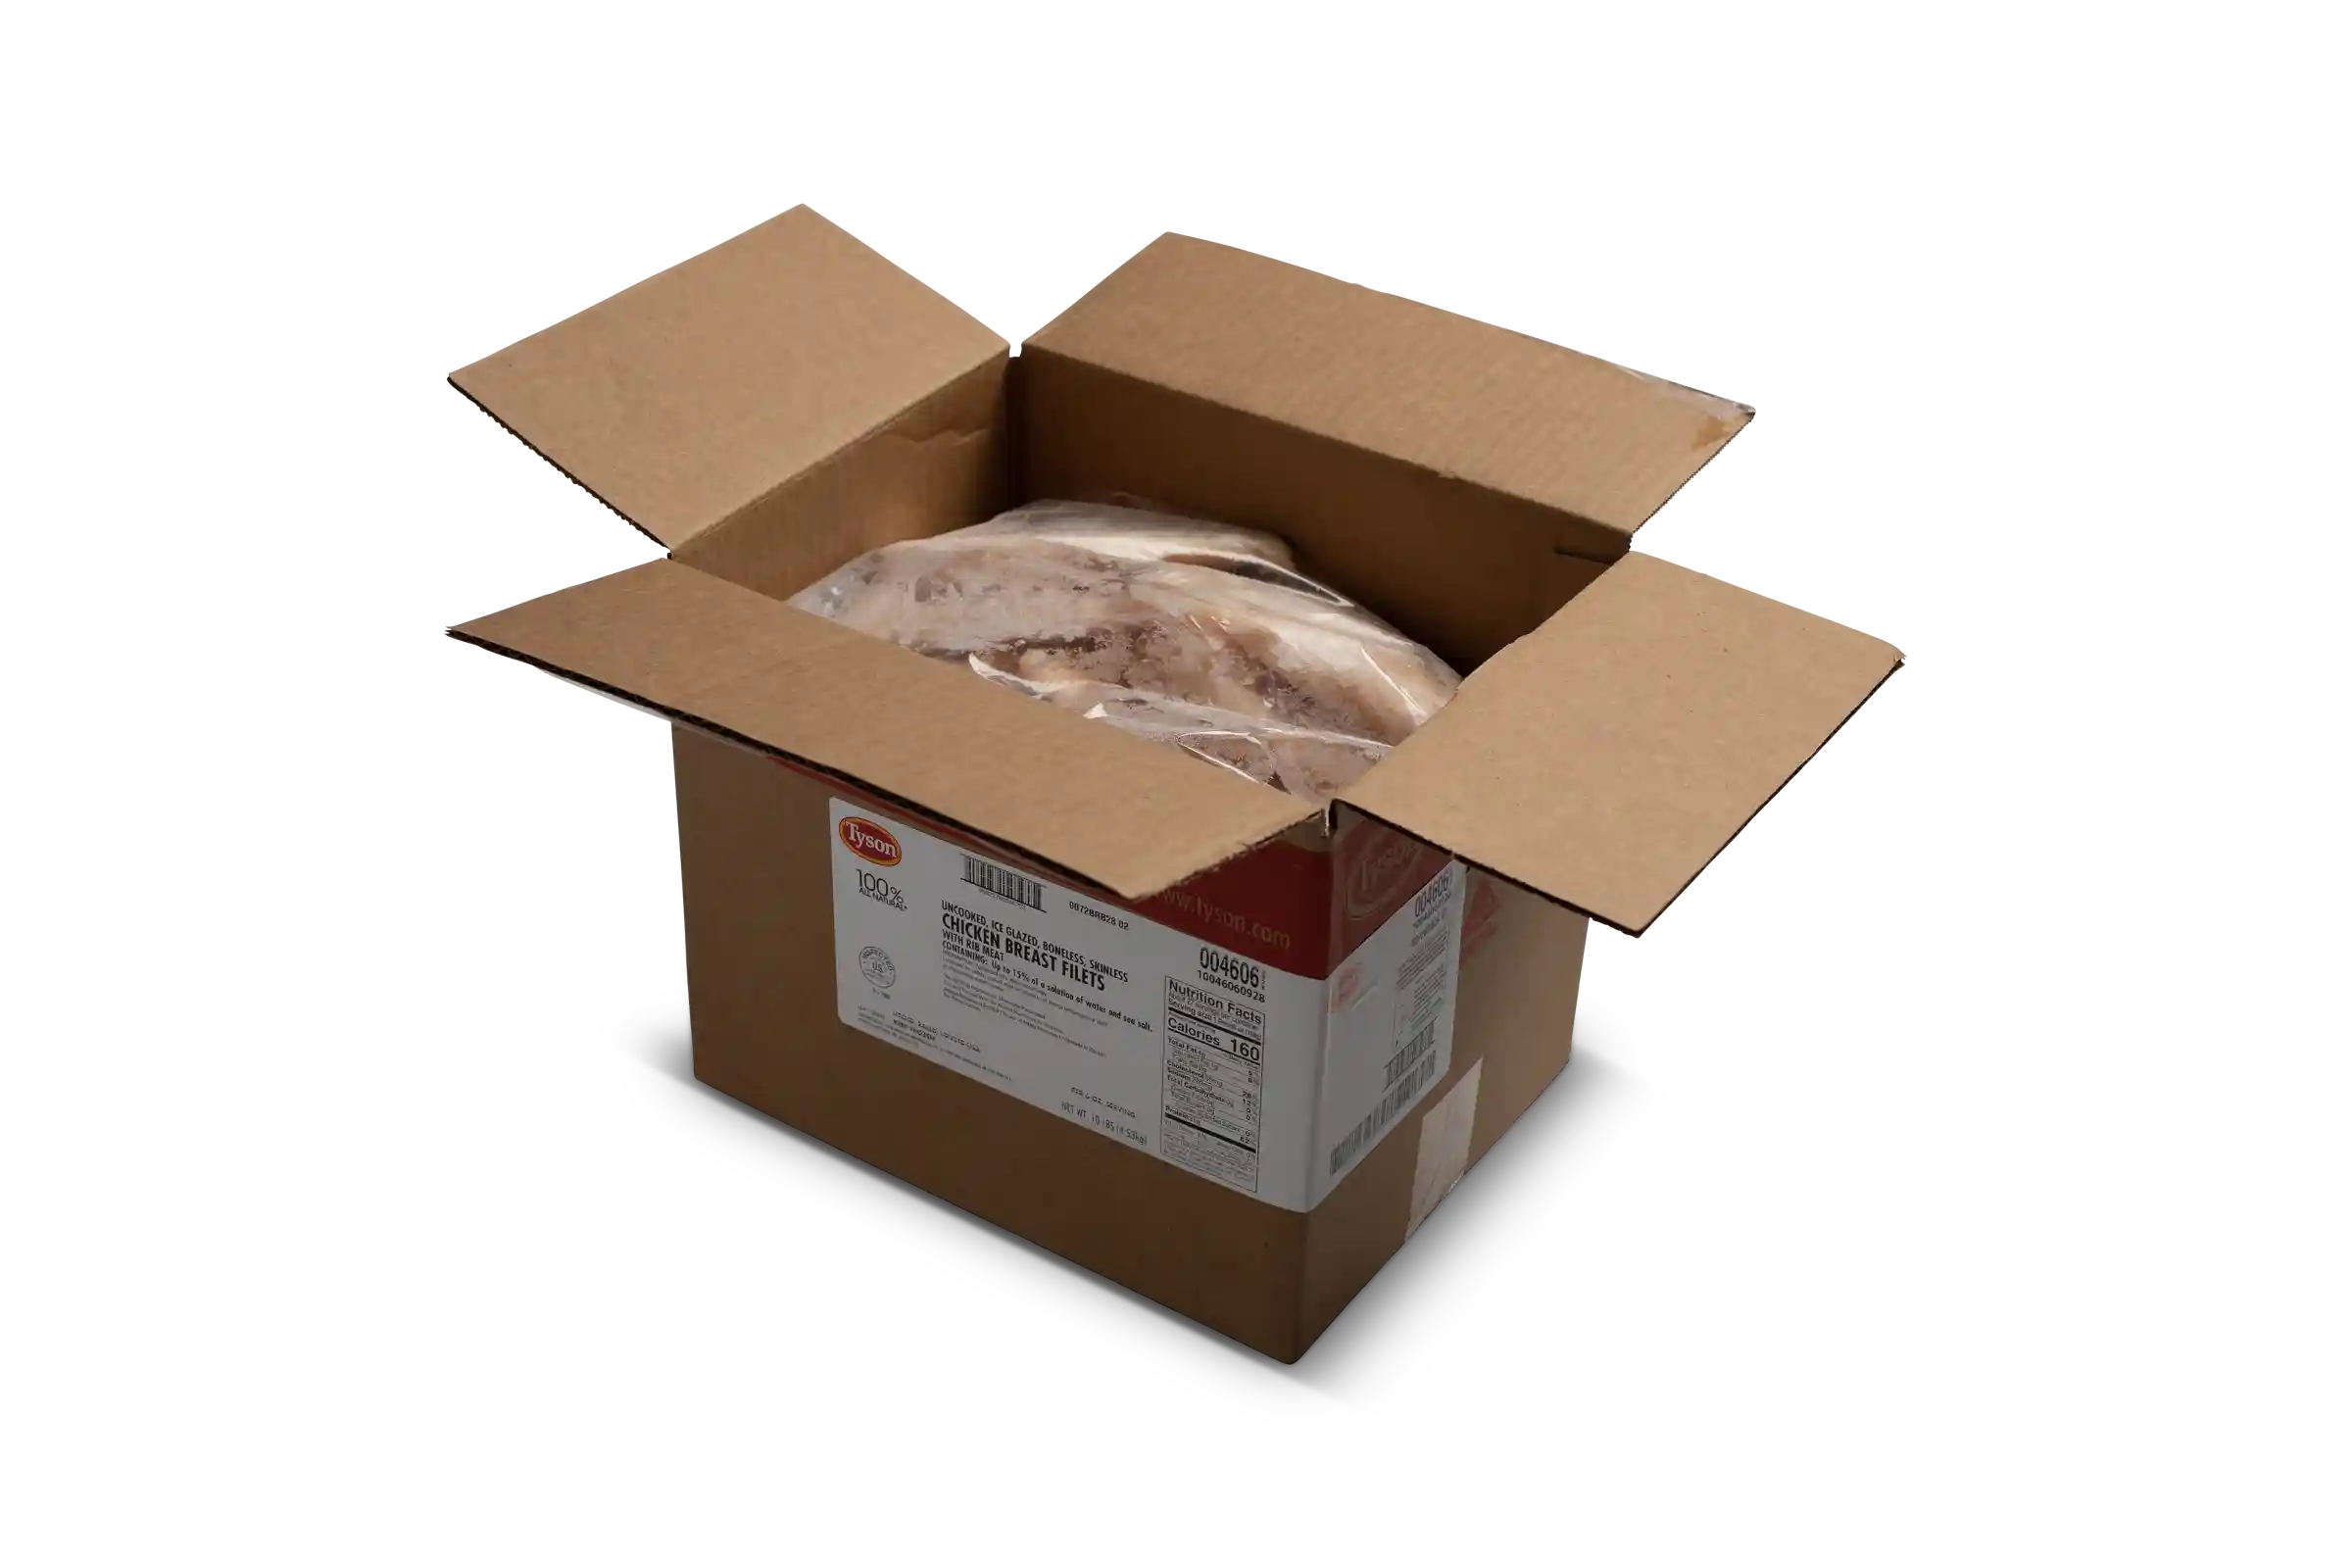  Tyson® Uncooked, Ice Glazed Boneless Skinless Chicken Breast Filets with Rib Meat_image_31